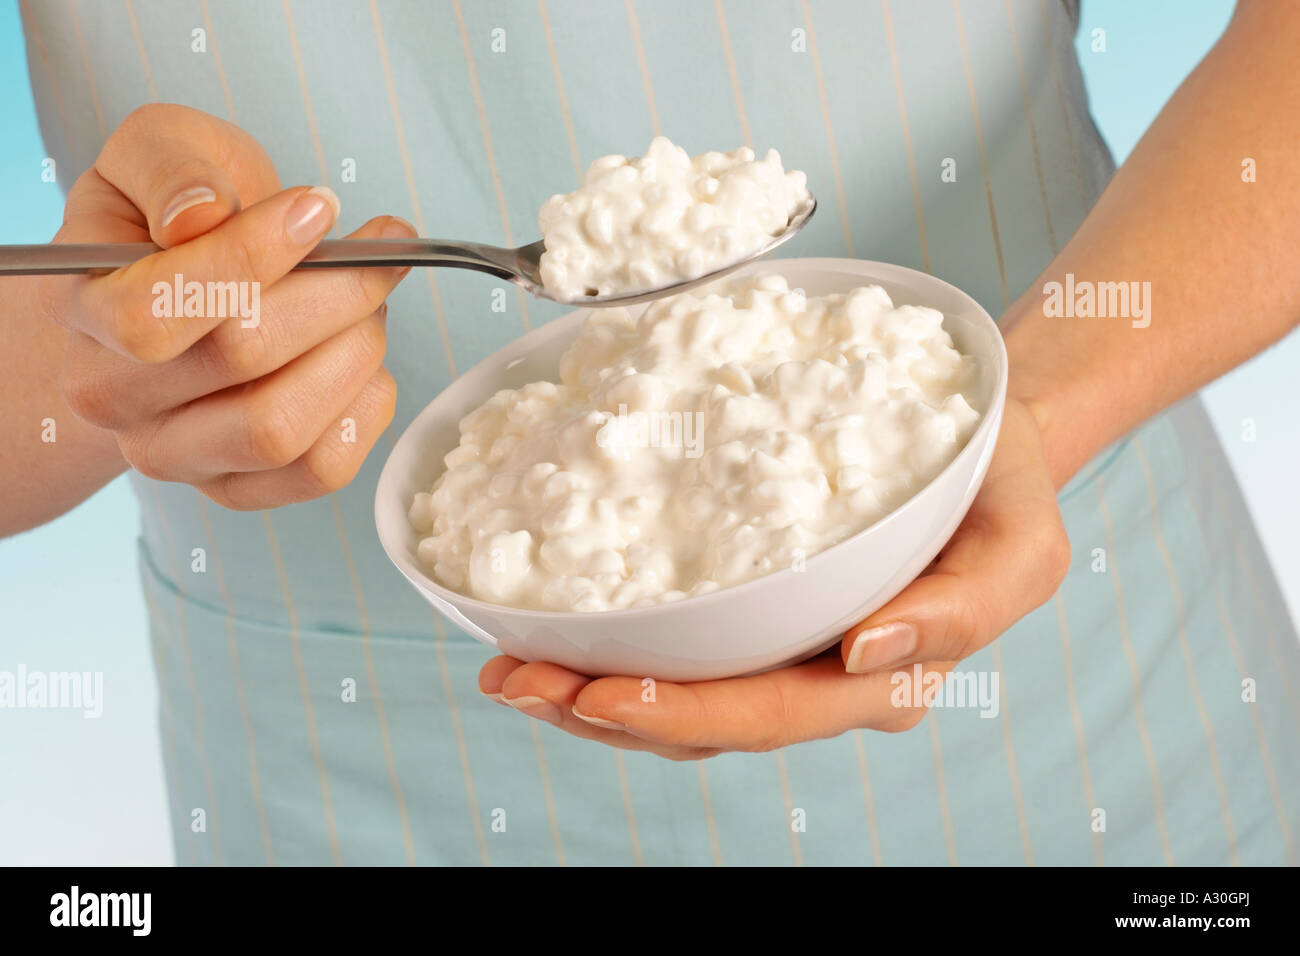 Woman Eating Cottage Cheese Stock Photo 10630409 Alamy